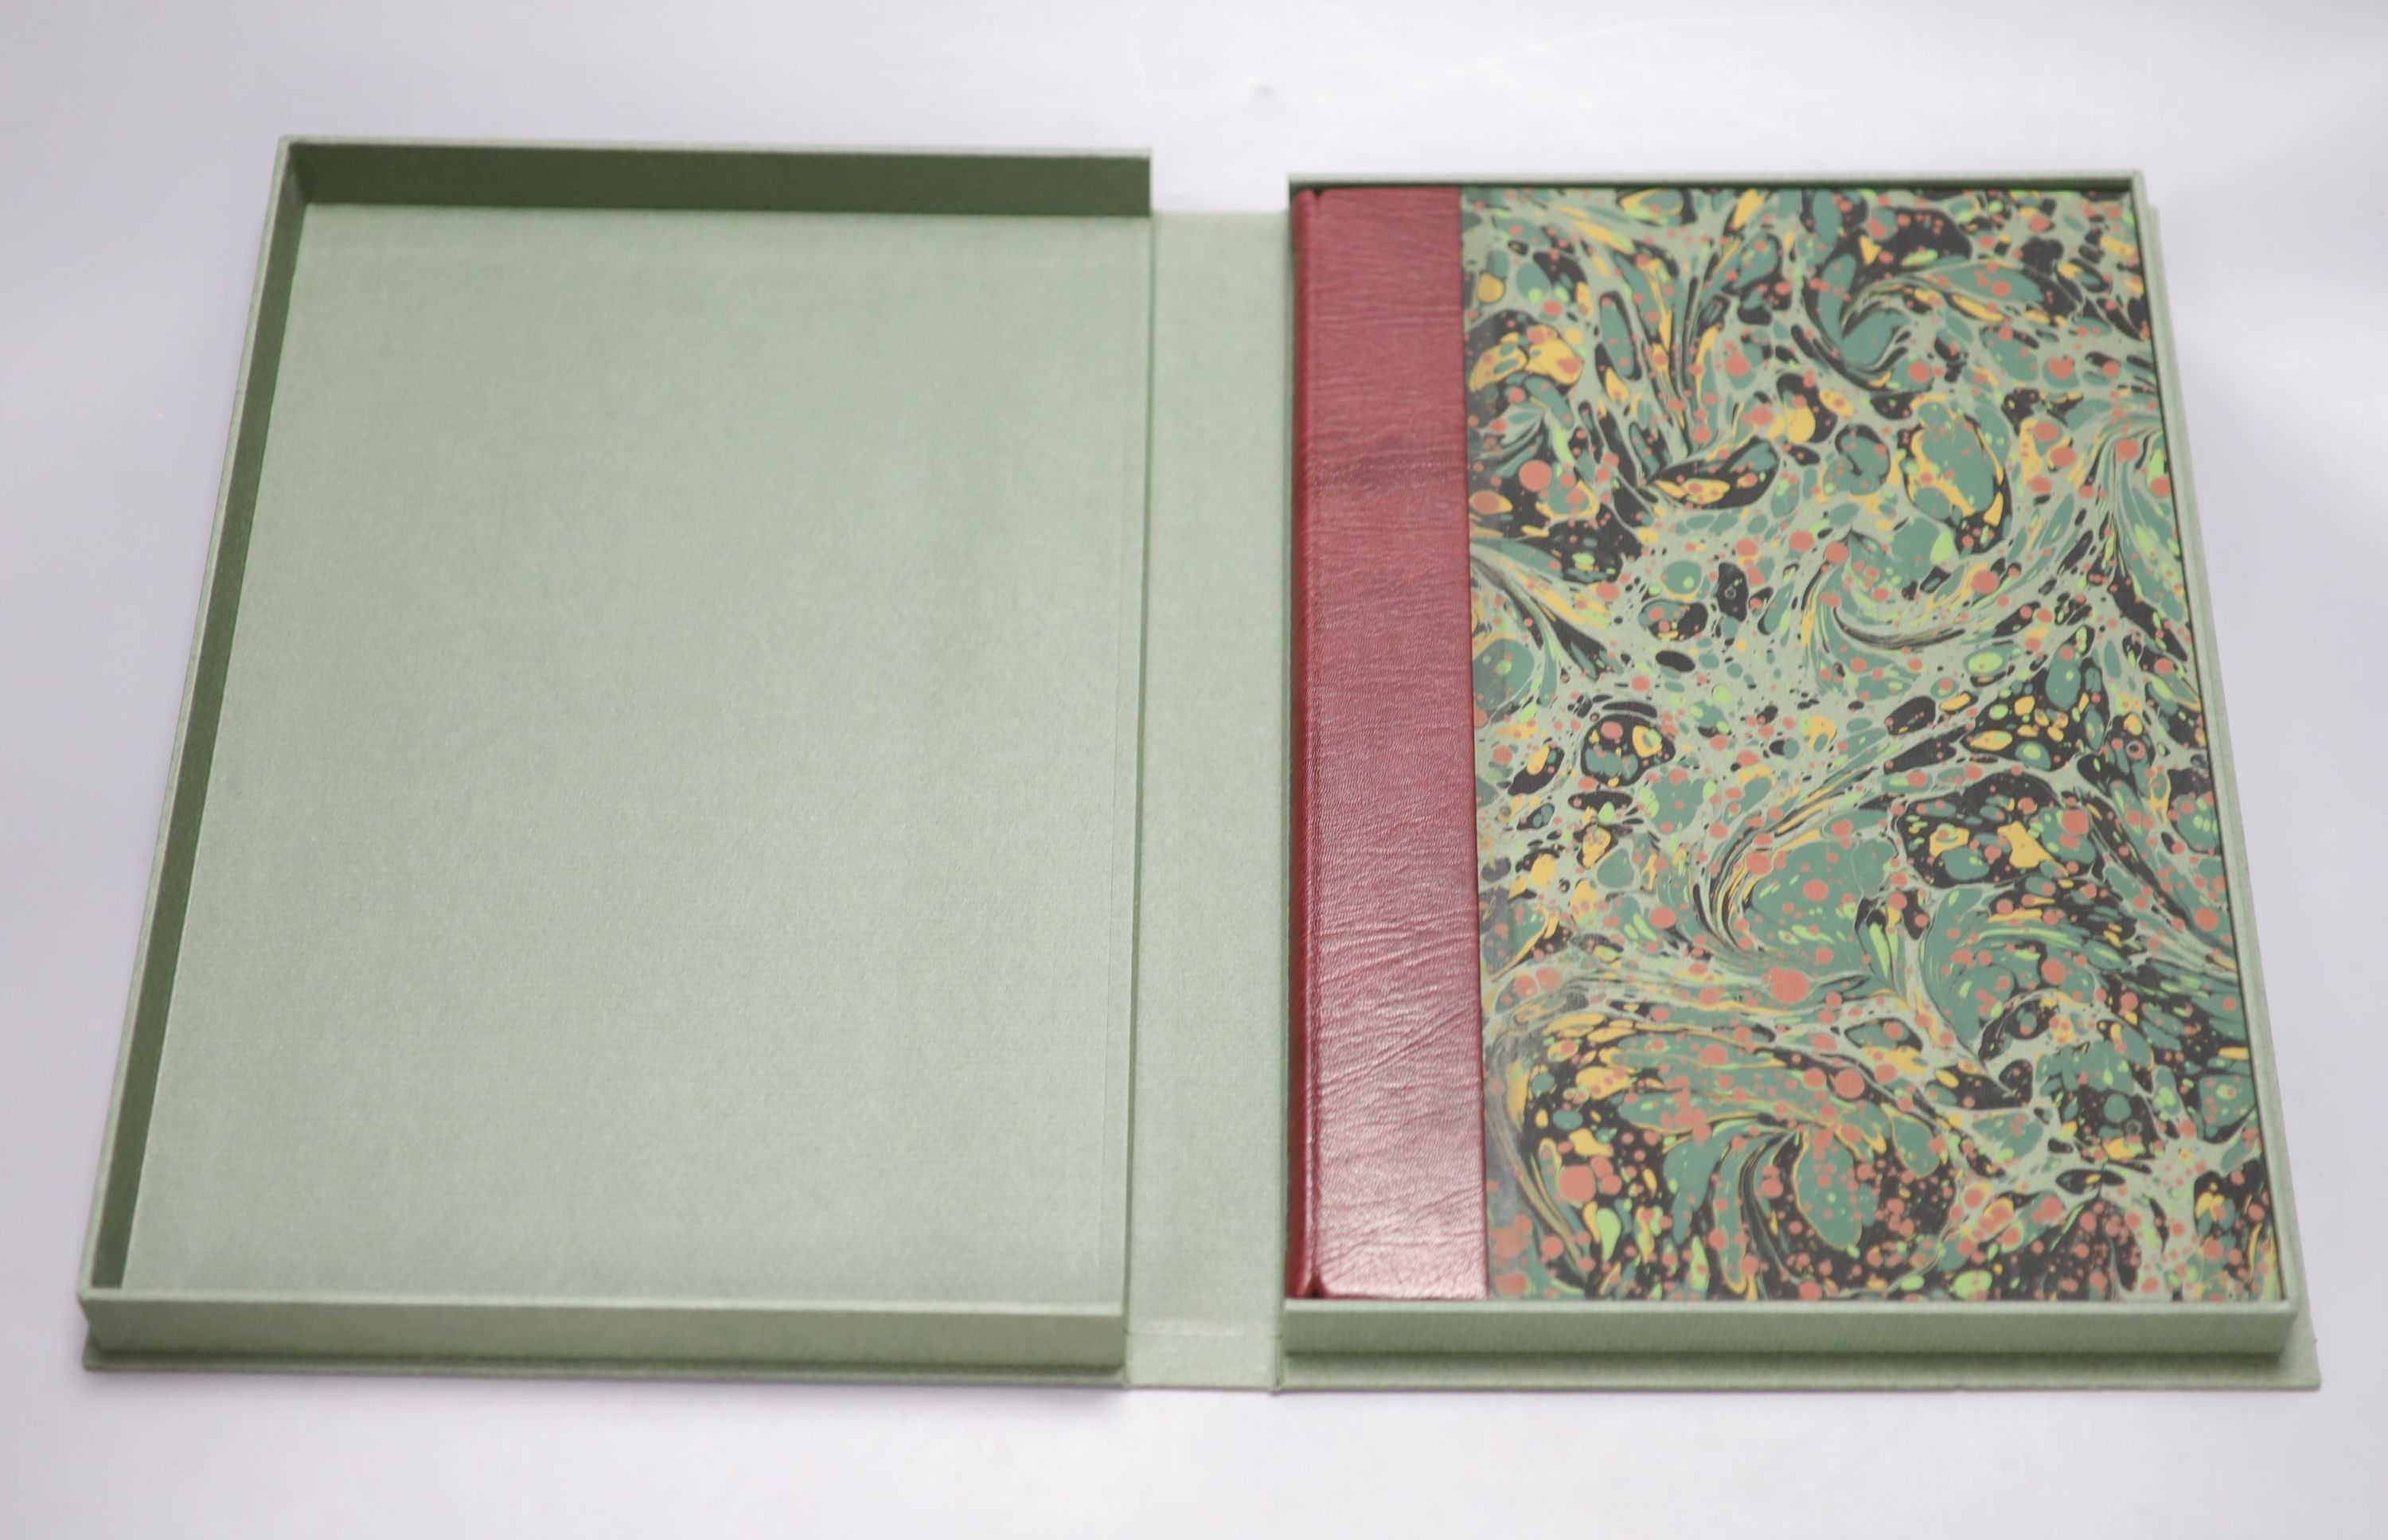 Wilmot, John, The Earl of Rochester, Perfect and Imperfect Enjoyments: Poems, quarter bound in leather with marbled boards, in a presentation box, Folio Society limited edition (edition number listed as ‘B.B’) together w